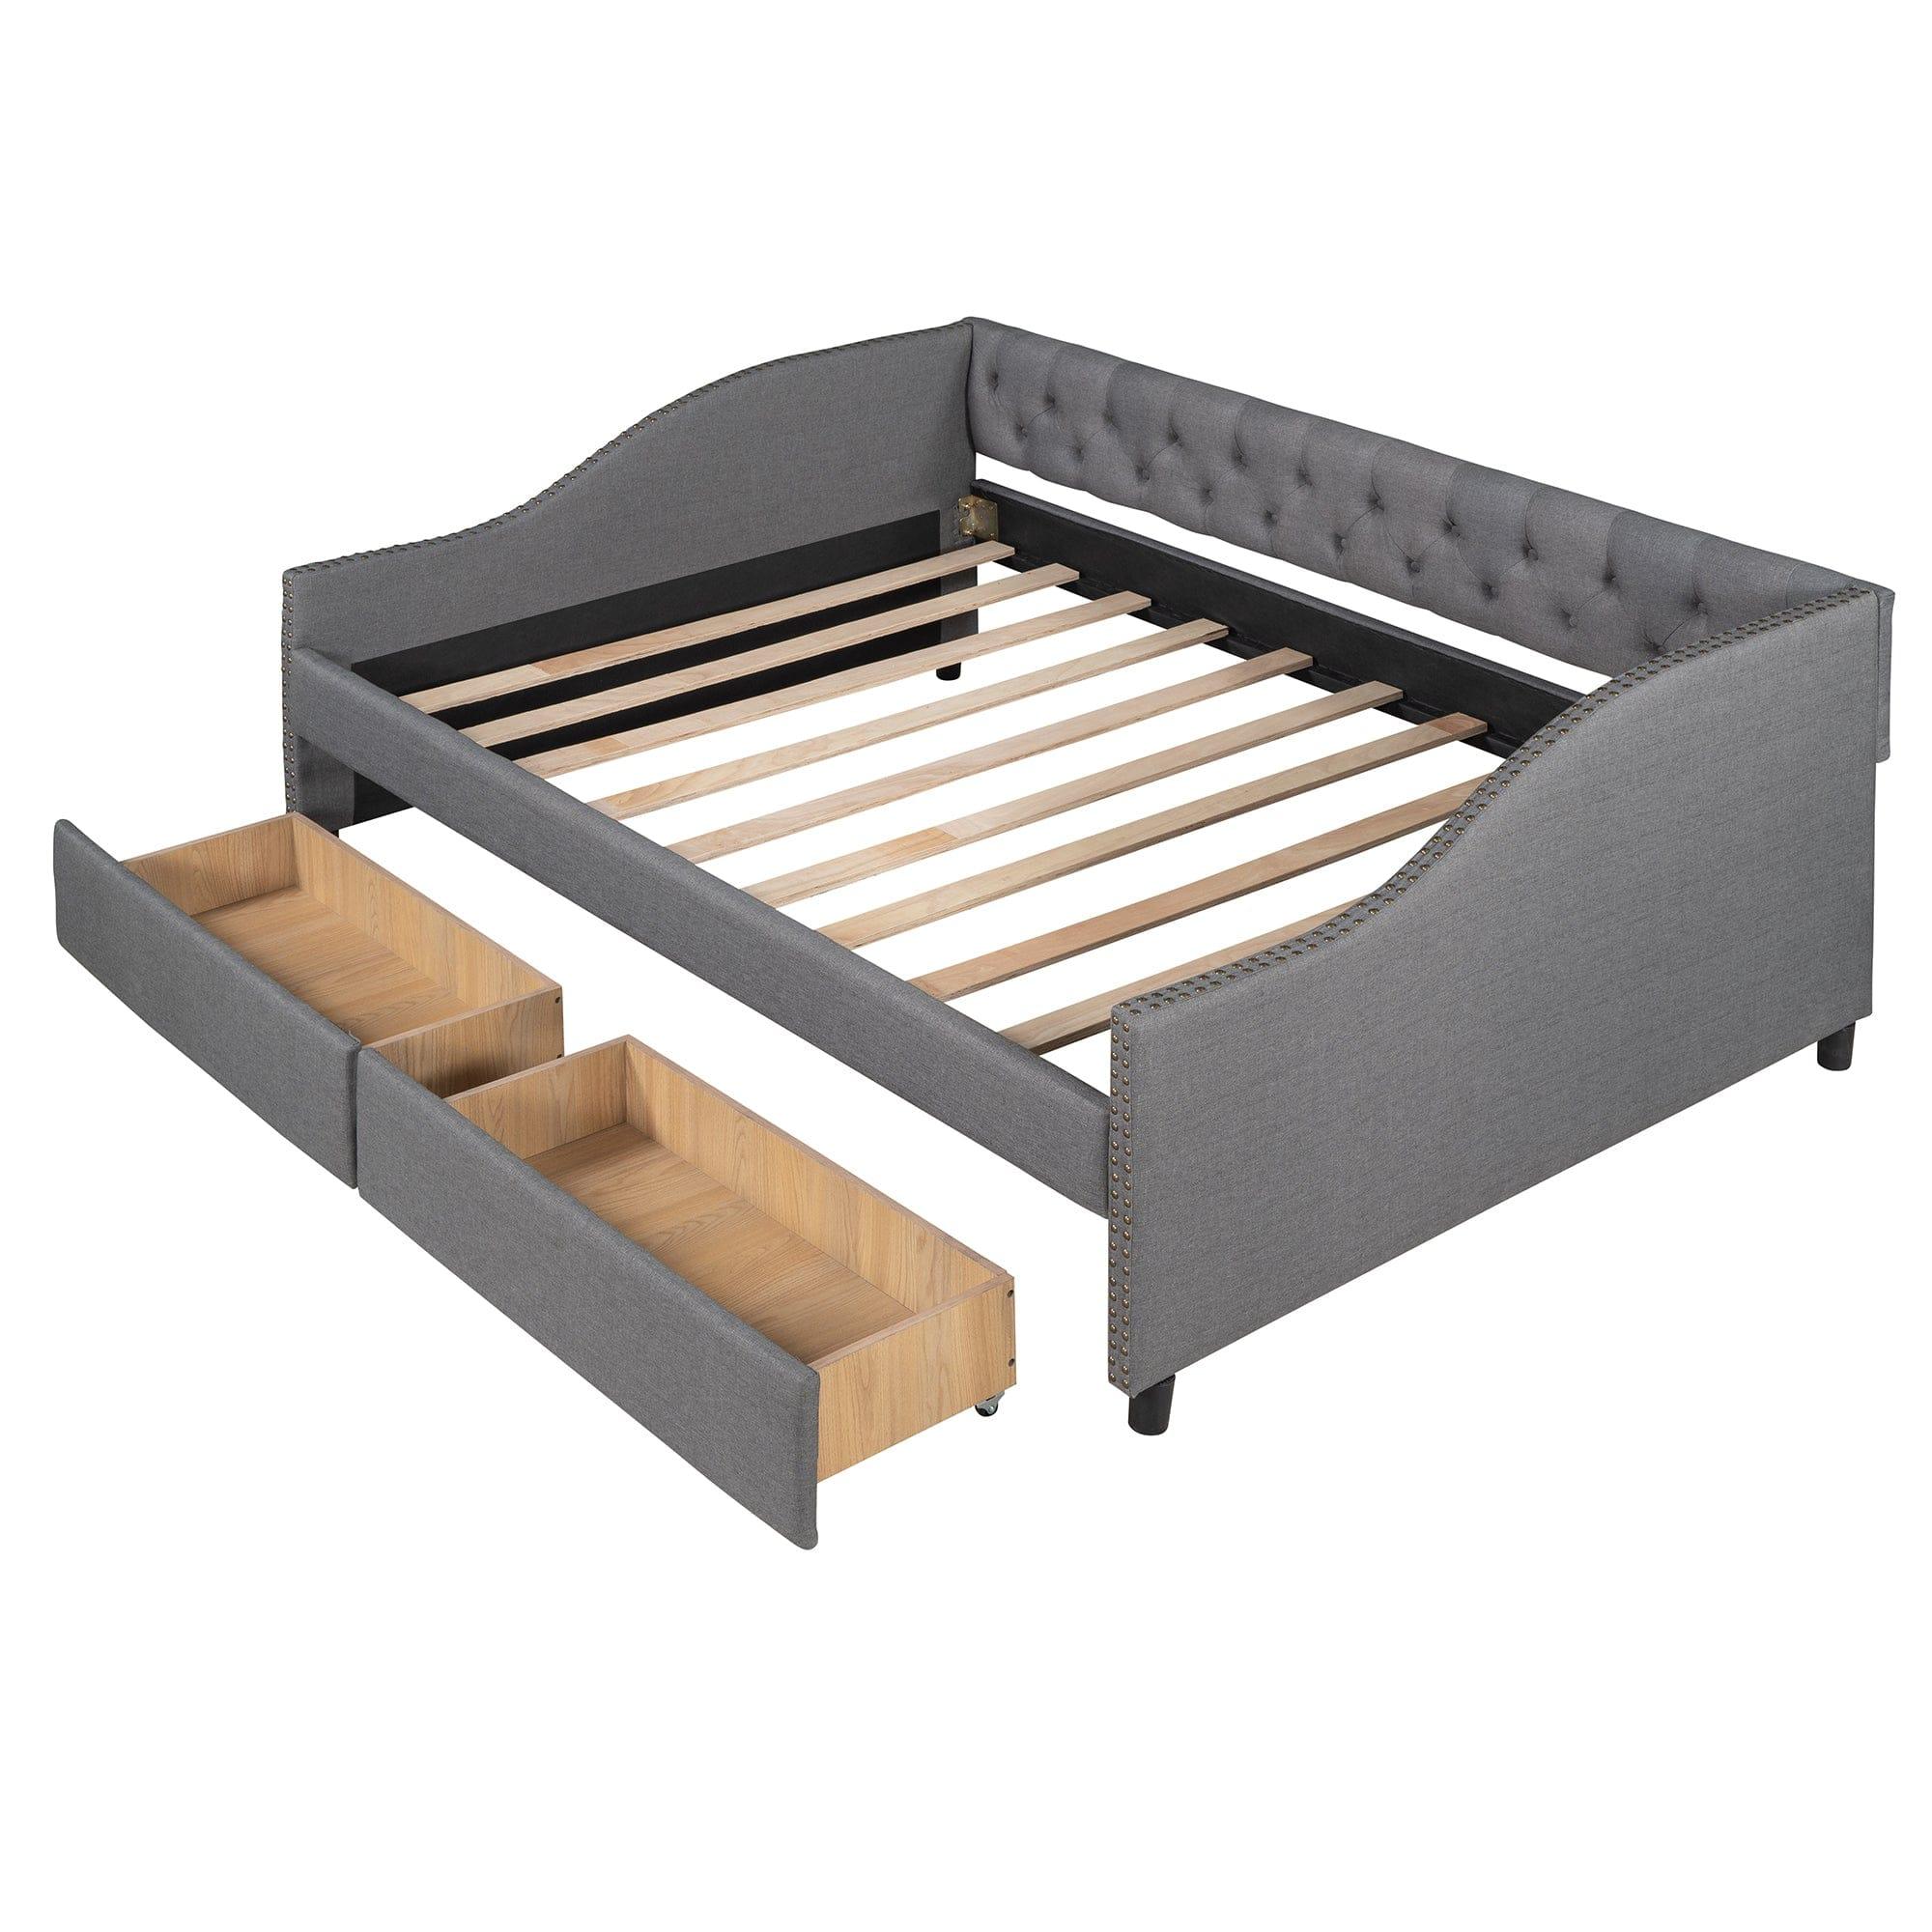 Shop Upholstered daybed with Two Drawers, Wood Slat Support, Gray, Full Size(OLD SKU :LP001111AAE) Mademoiselle Home Decor